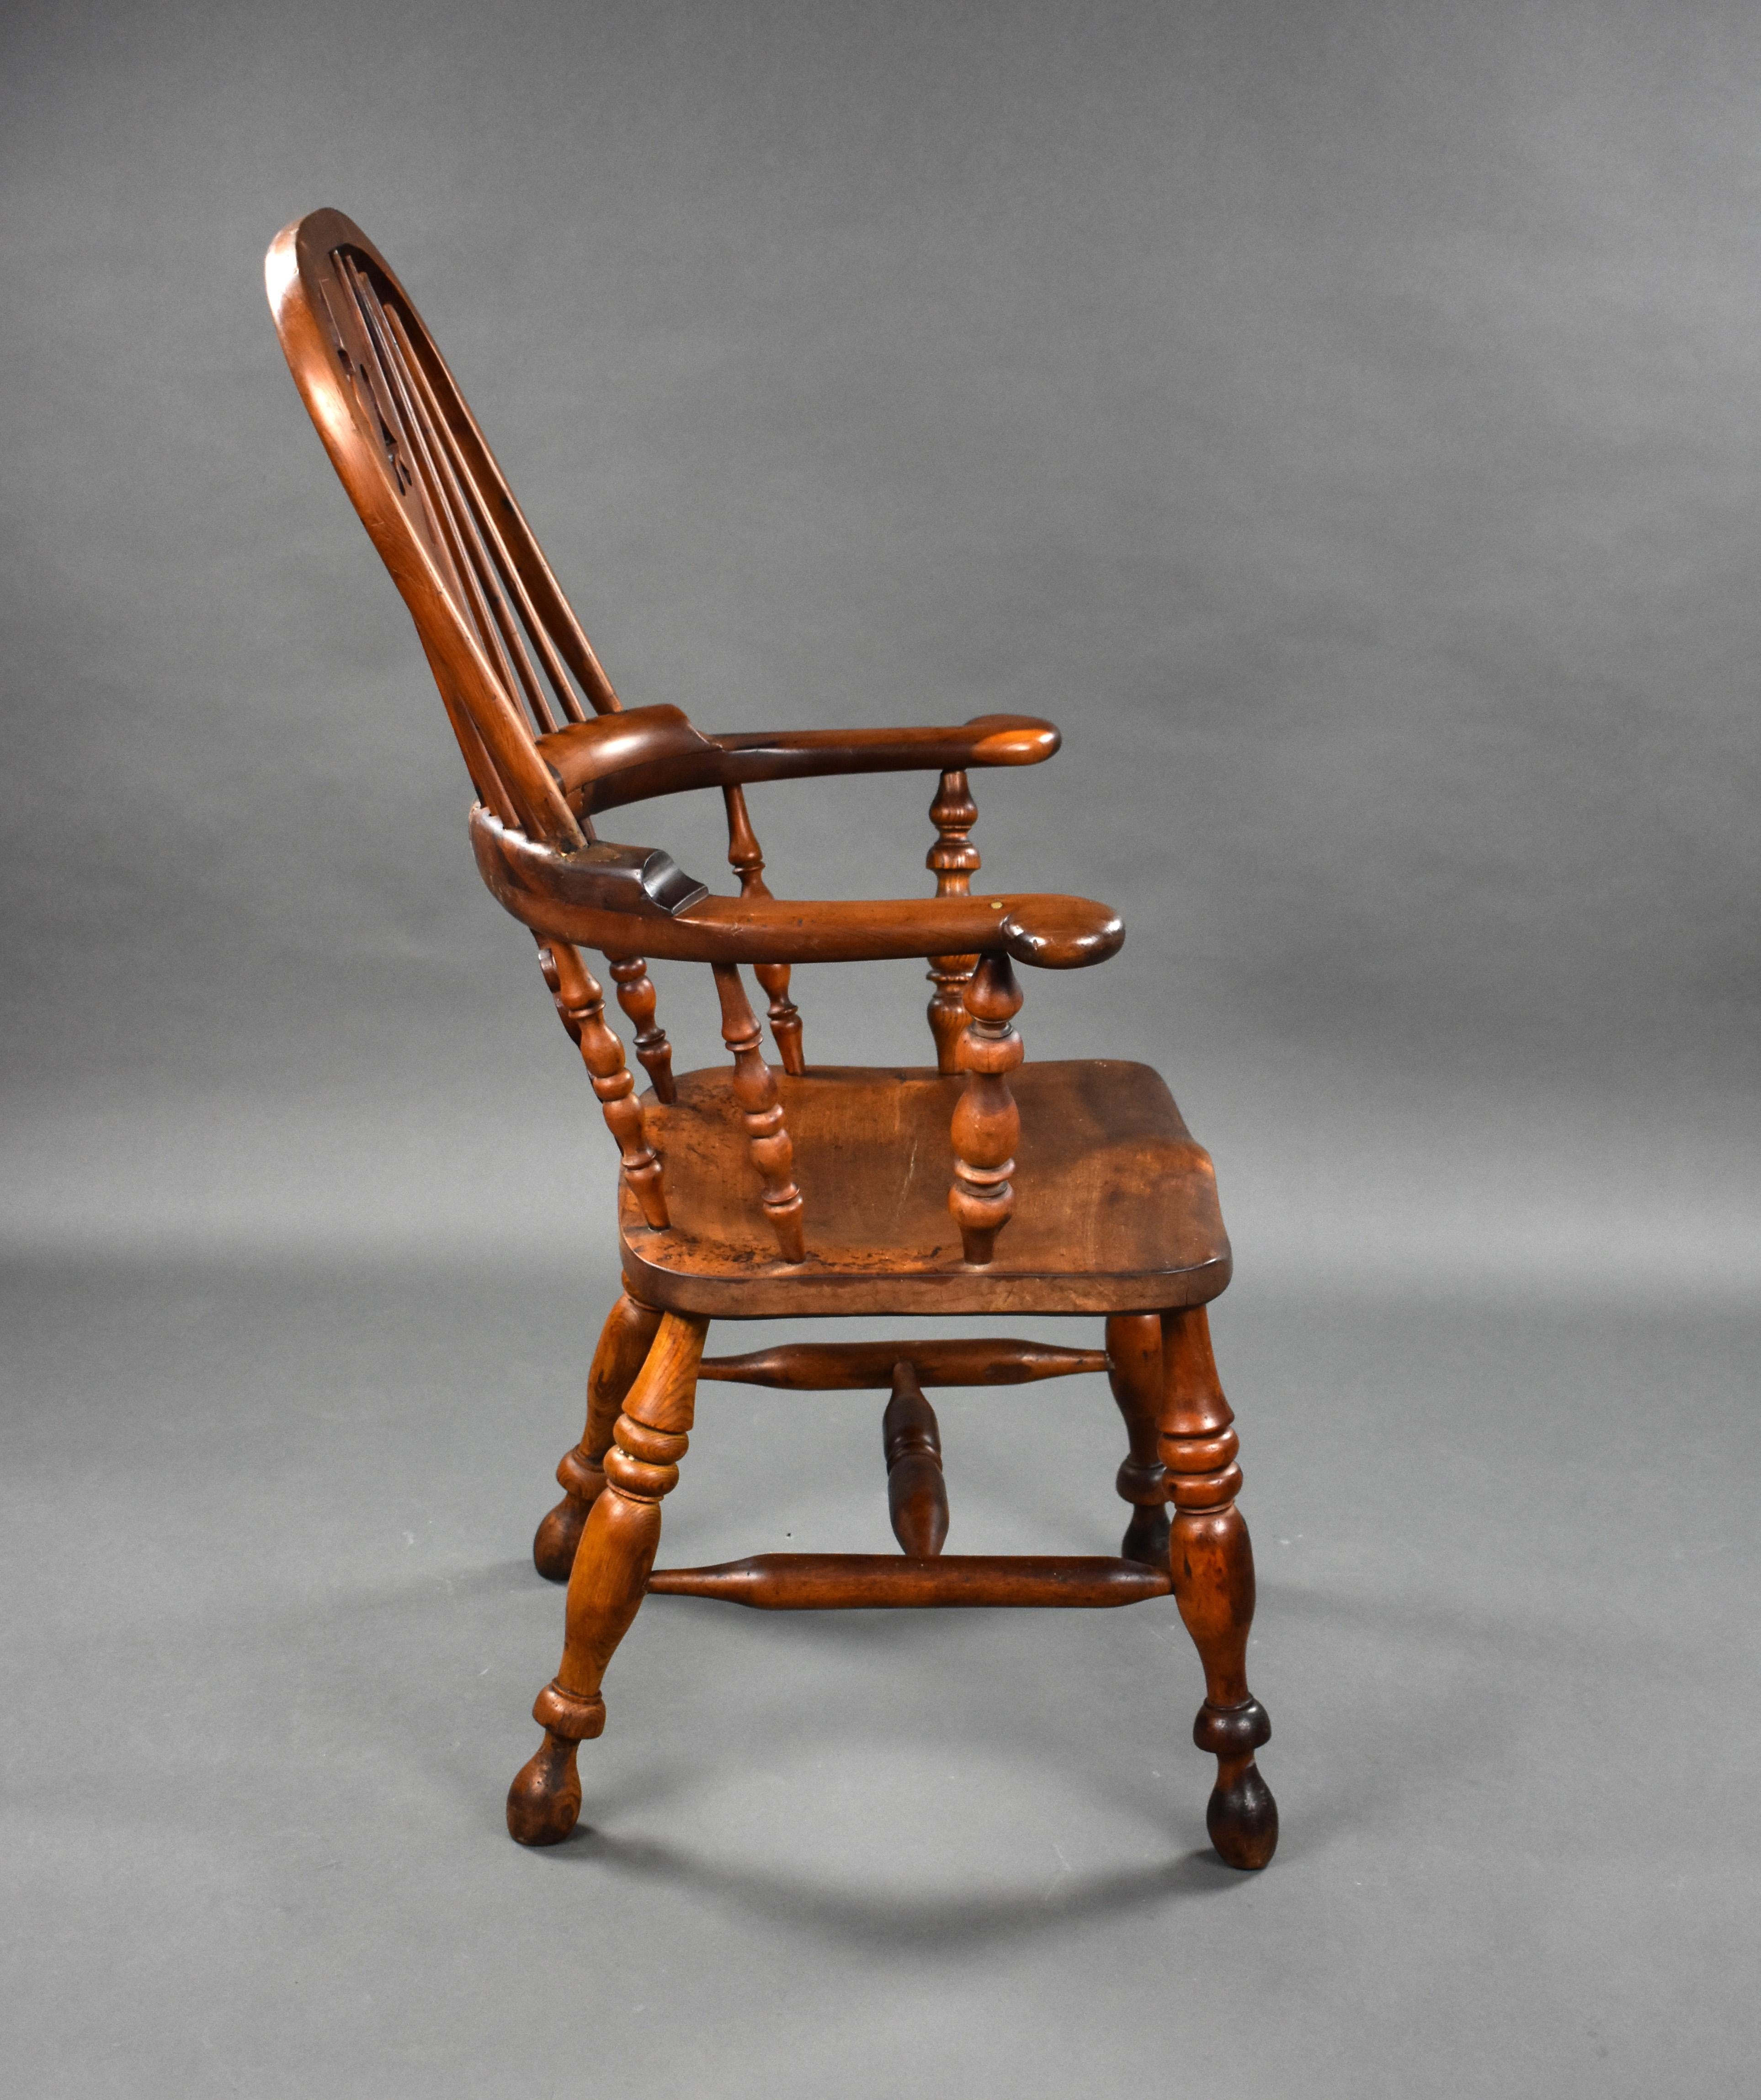 19th Century English Yew Wood High Back Broad Arm Windsor Chair In Good Condition For Sale In Chelmsford, Essex